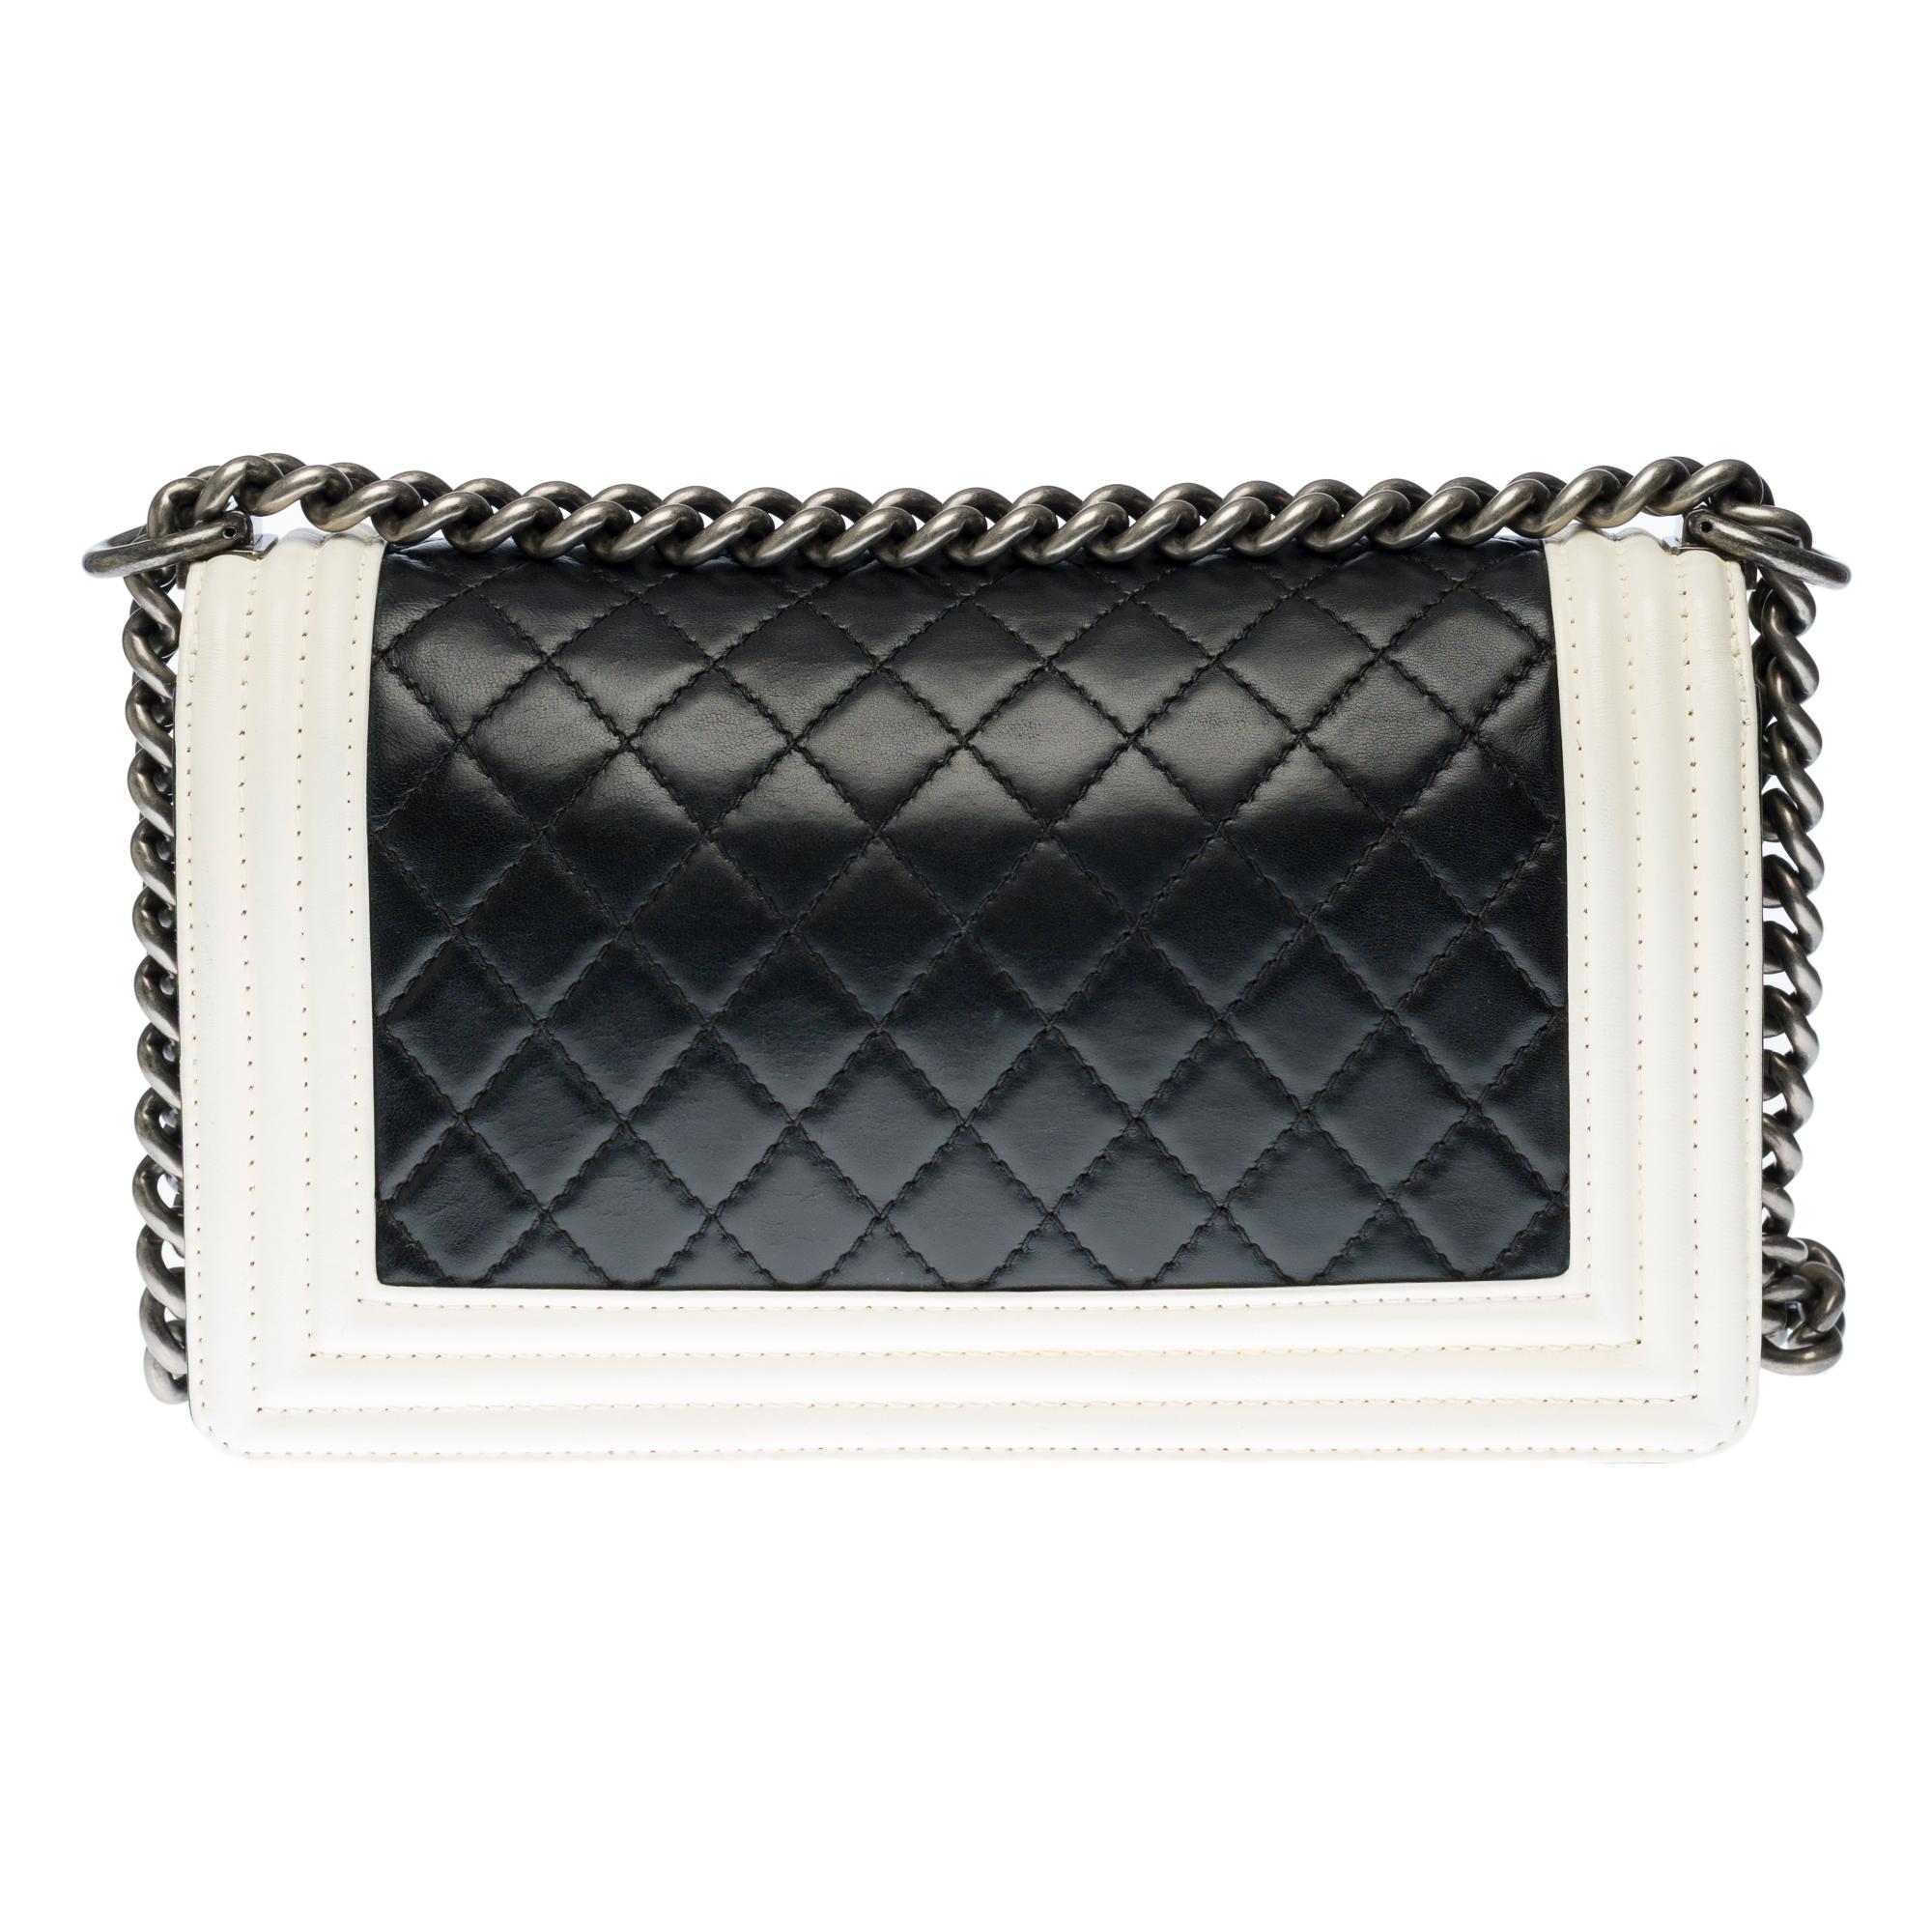 The iconic Chanel Boy shoulder bag in black quilted leather with white leather contour, upholstered in aged silver metal (shotgun barrel), an adjustable chain handle in silver metal allowing a shoulder or shoulder strap.

An antique silver metal